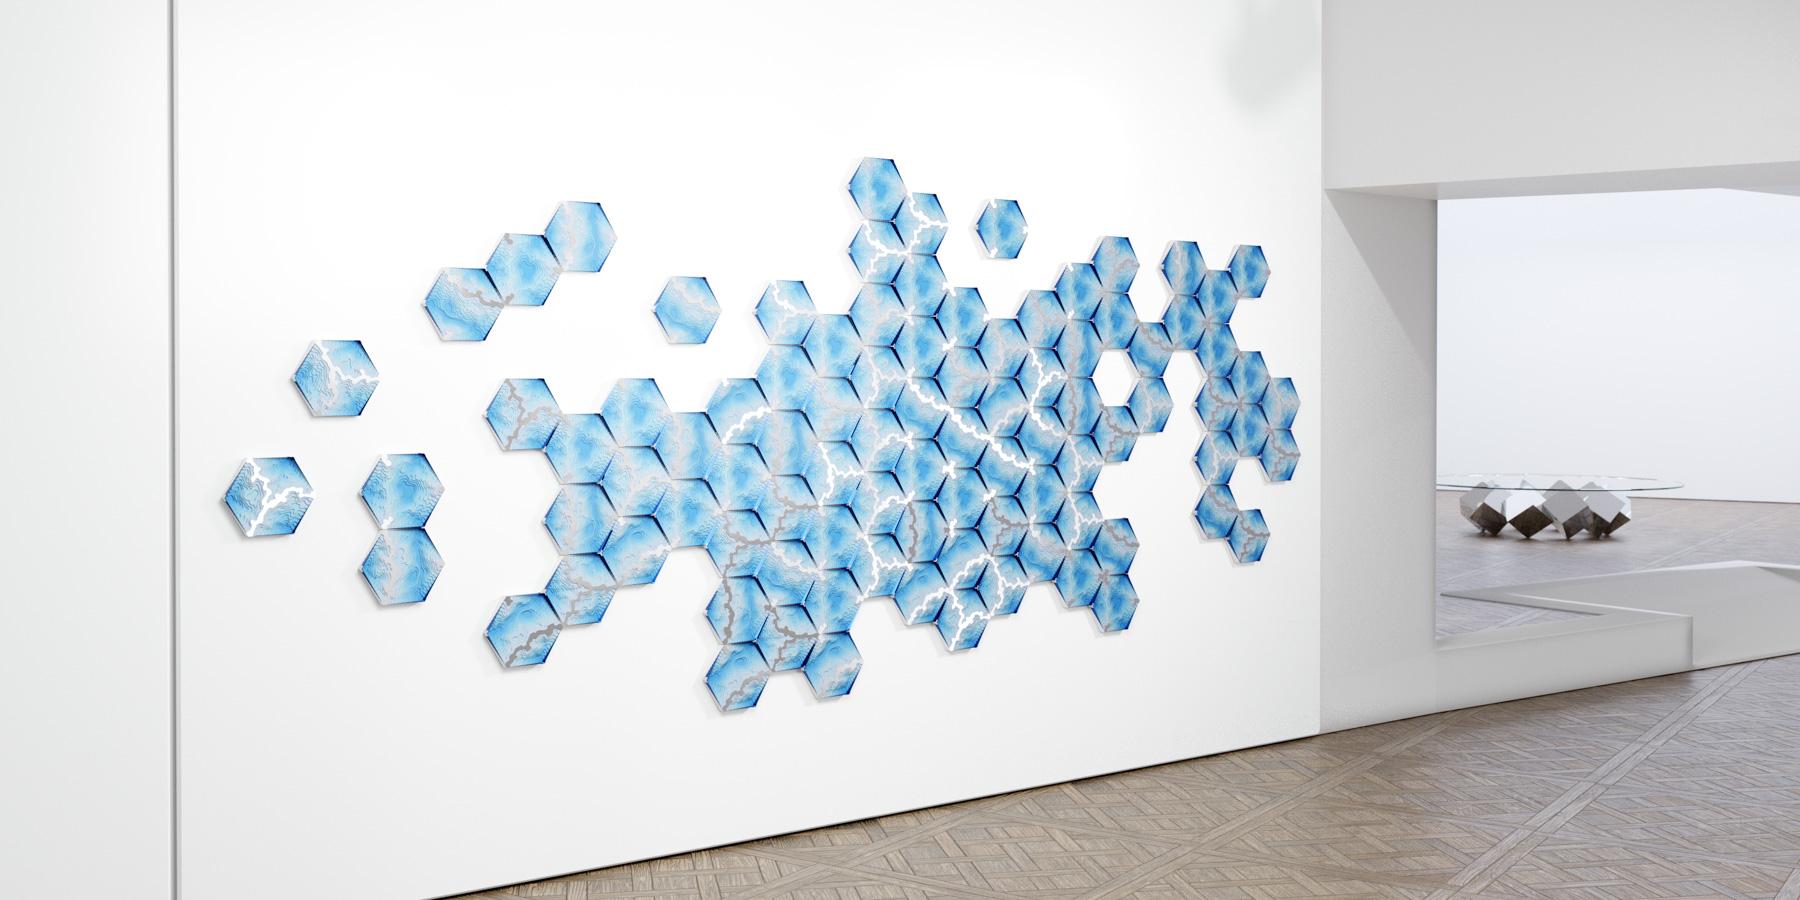 Duffy London expands upon its iconic Abyss collection with the new Abyss Wall Tile, a unique interchangeable design that invites the user to create and then curate their own personalised Abyss within a space.

Realised using the latest 3d printing